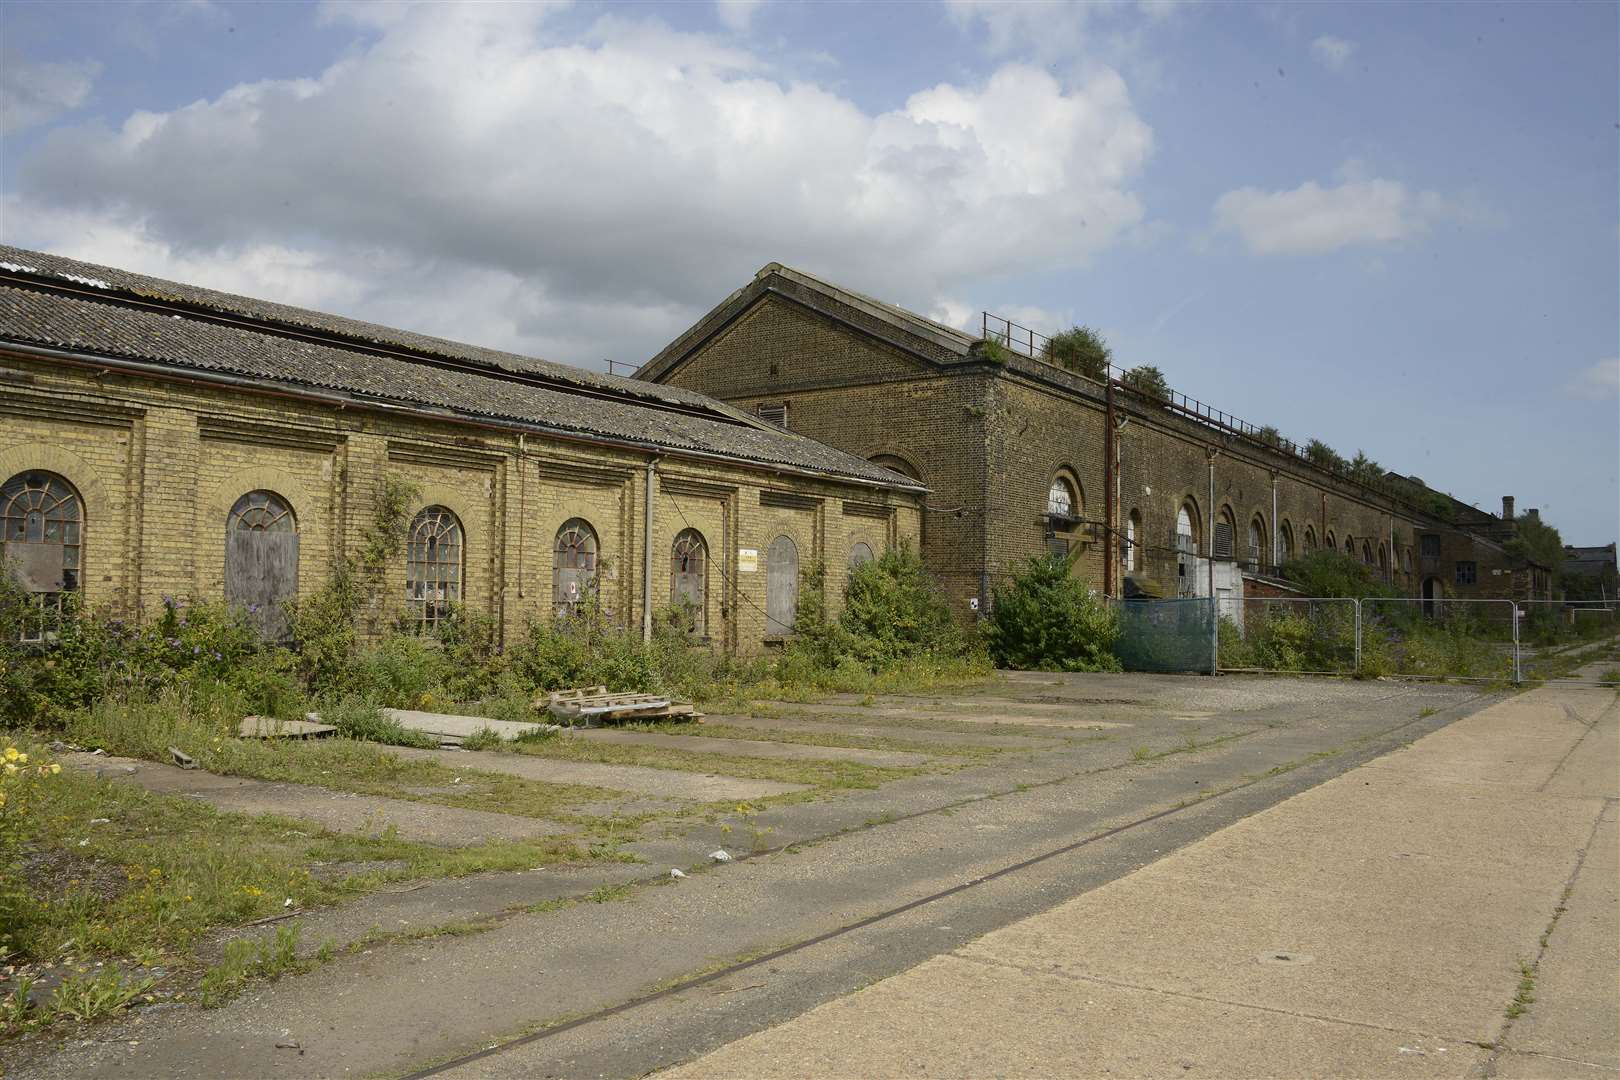 The former engine sheds are set to be transformed